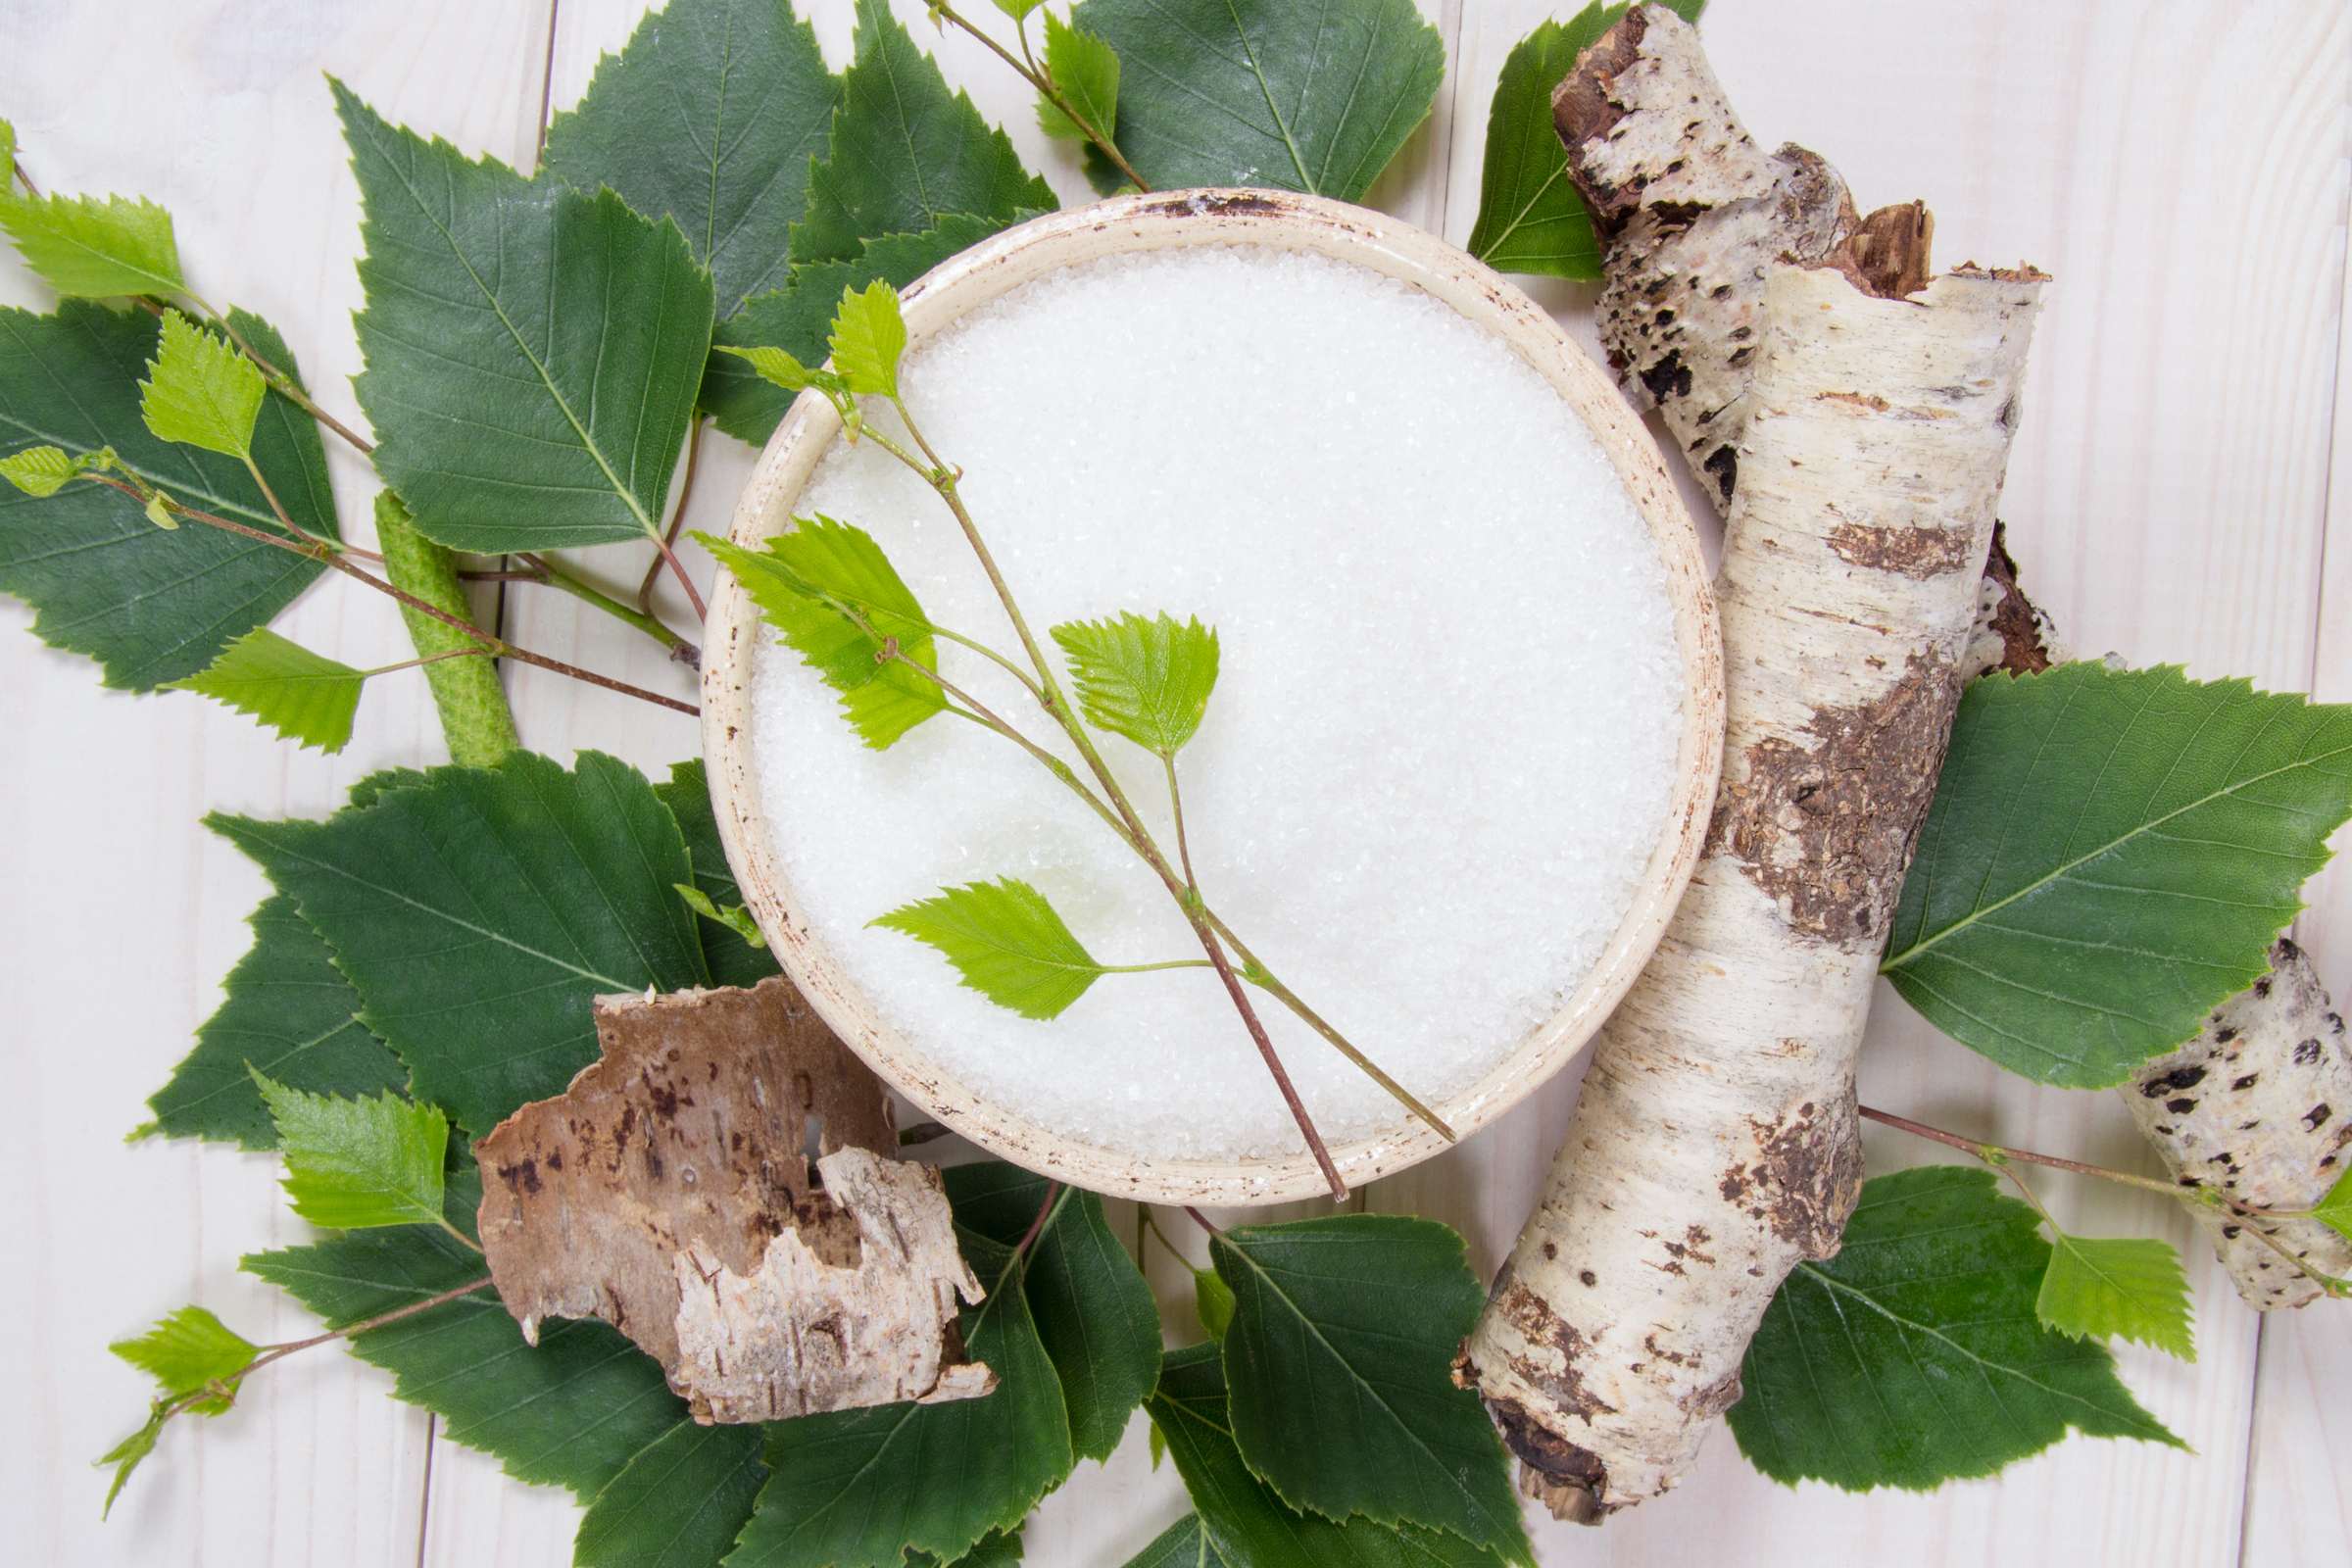 a bowl of white sugar-like xylitol sits in the middle of a spread of green leaves, next to pieces of birch wood